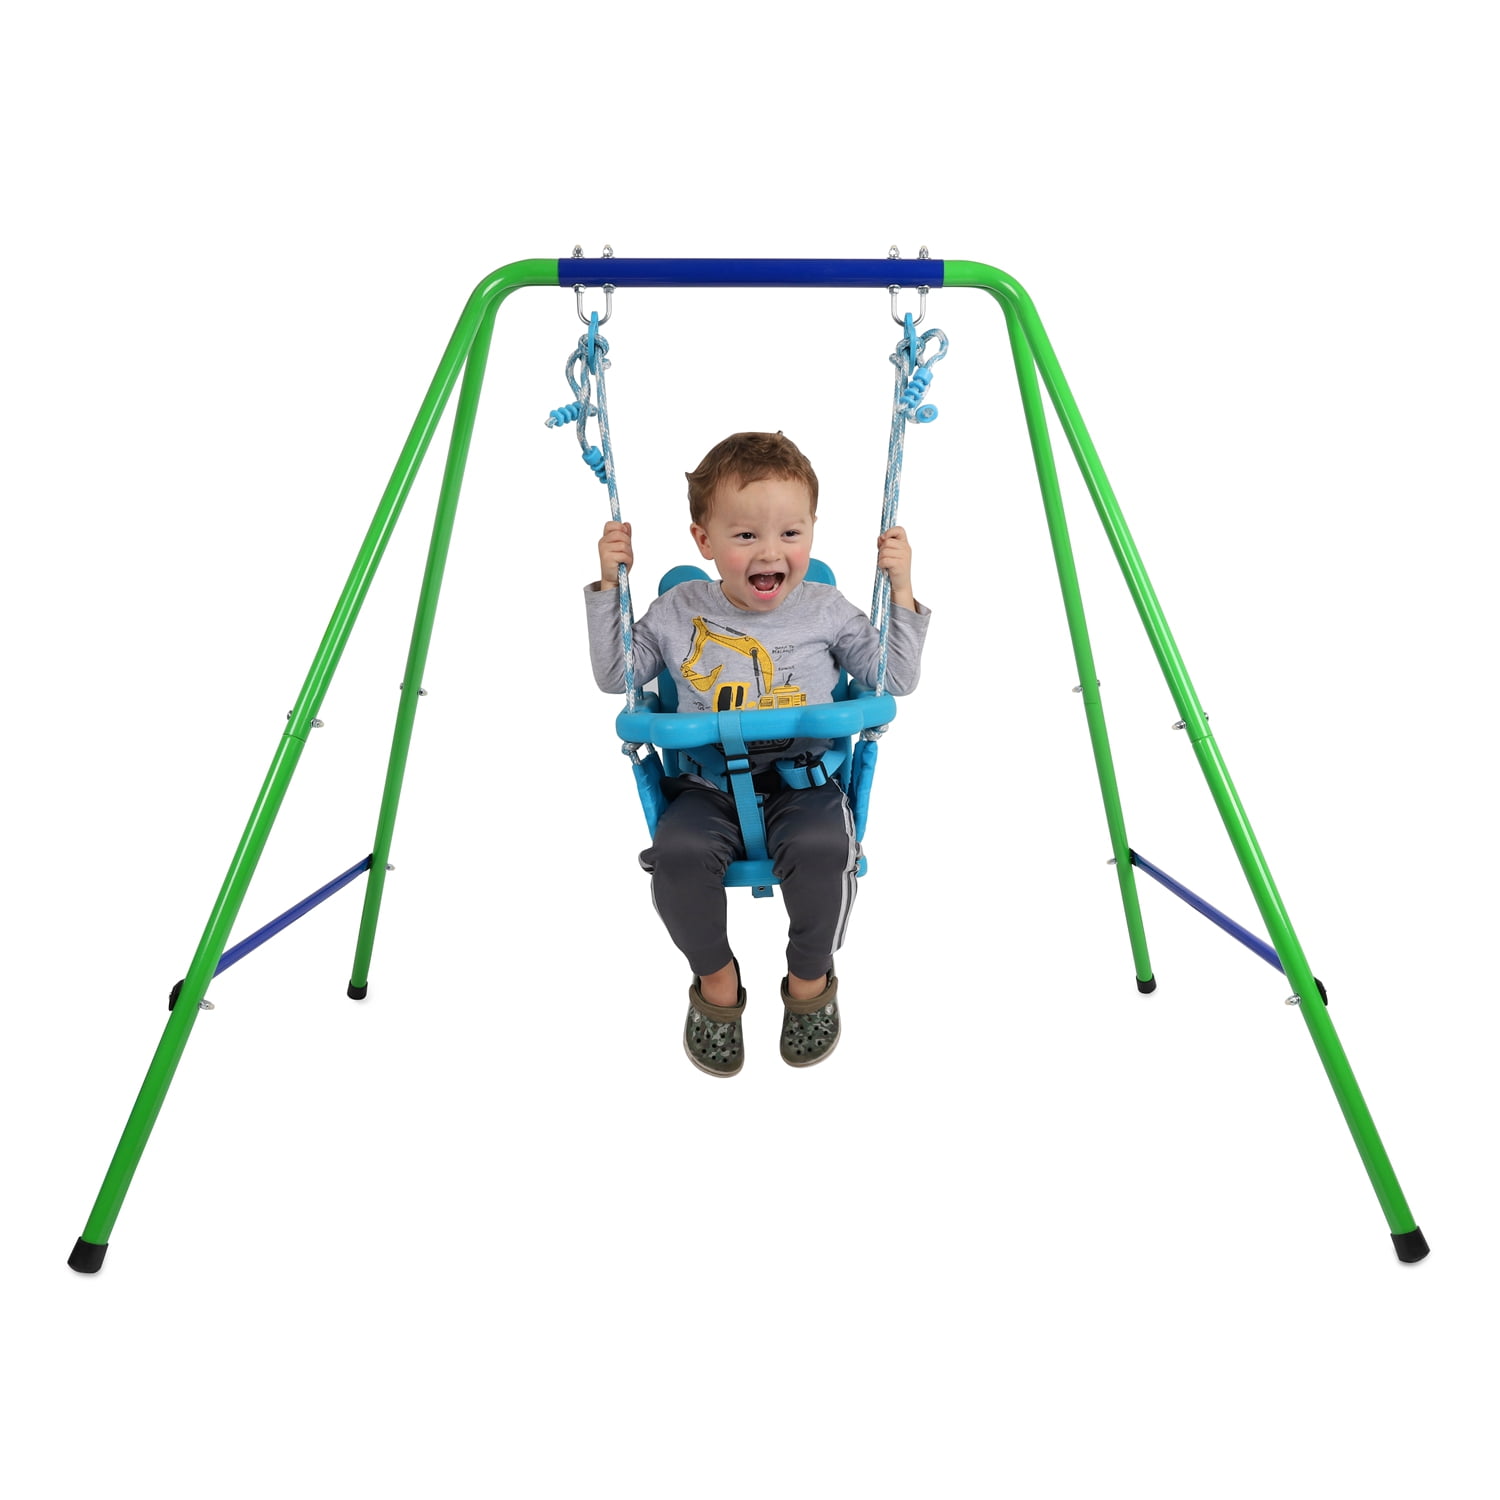 Kids Fun Toys Toddler Swing With Safety Harness For Indoor And Outdoor Play 